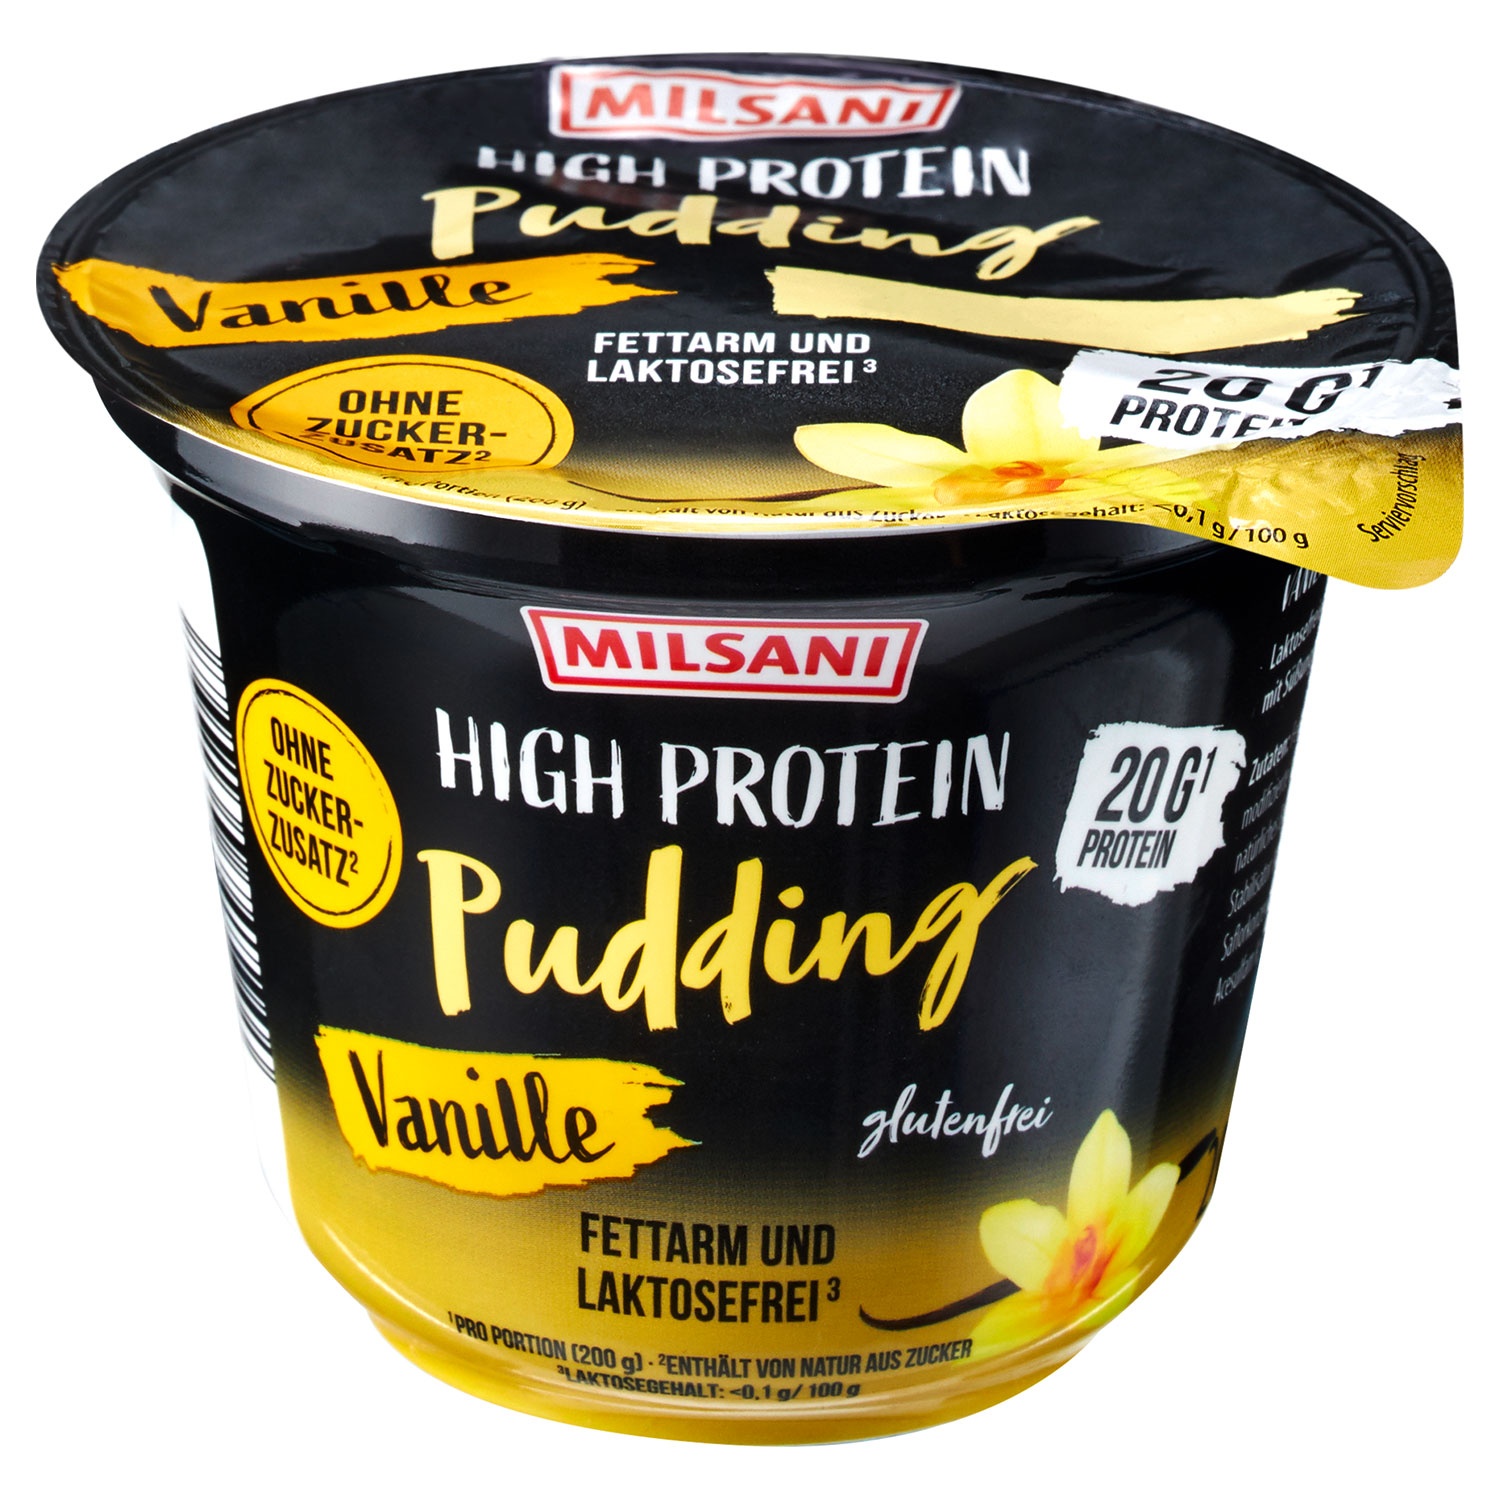 MILSANI High-Protein-Pudding 200 g